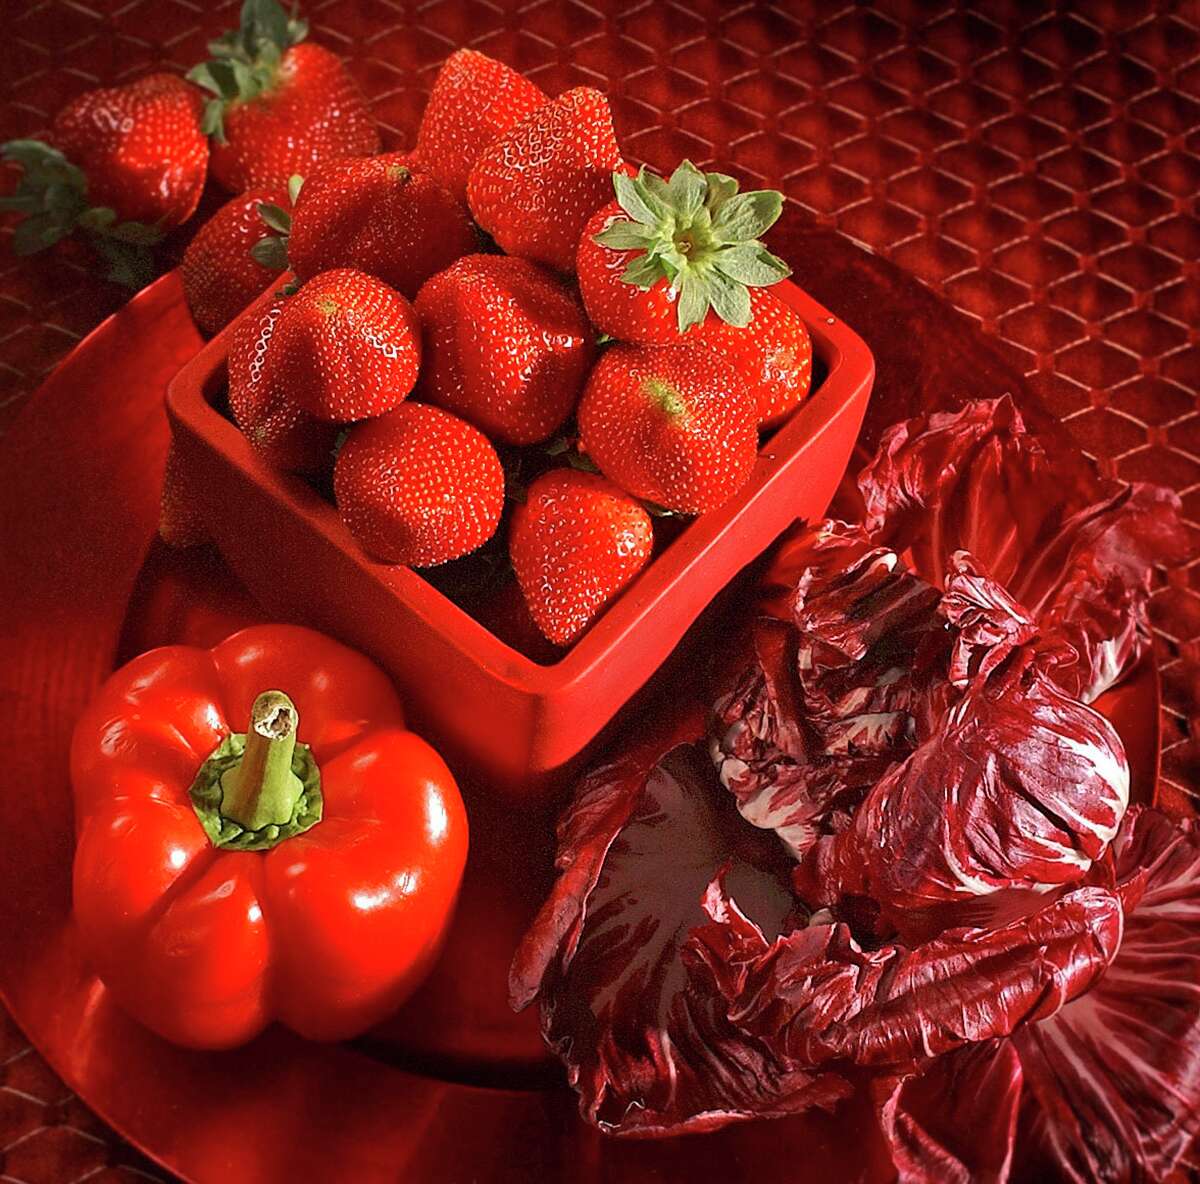 Red foods like, strawberries, red peppers and radicchio, help to improve heart health, memory function and urinary tract health.